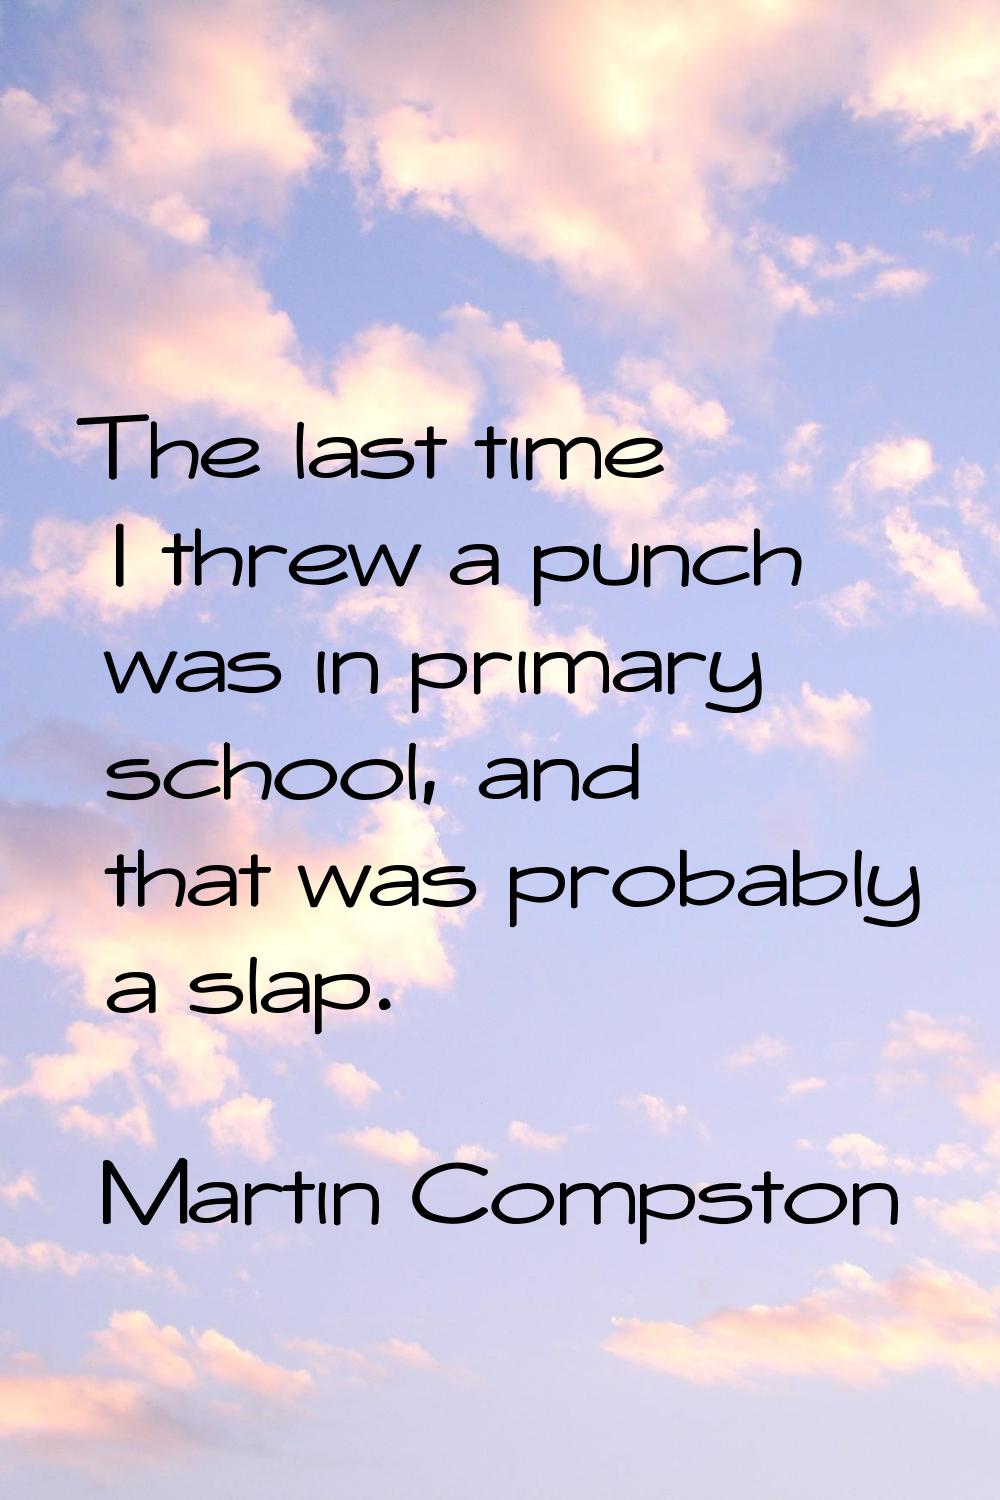 The last time I threw a punch was in primary school, and that was probably a slap.